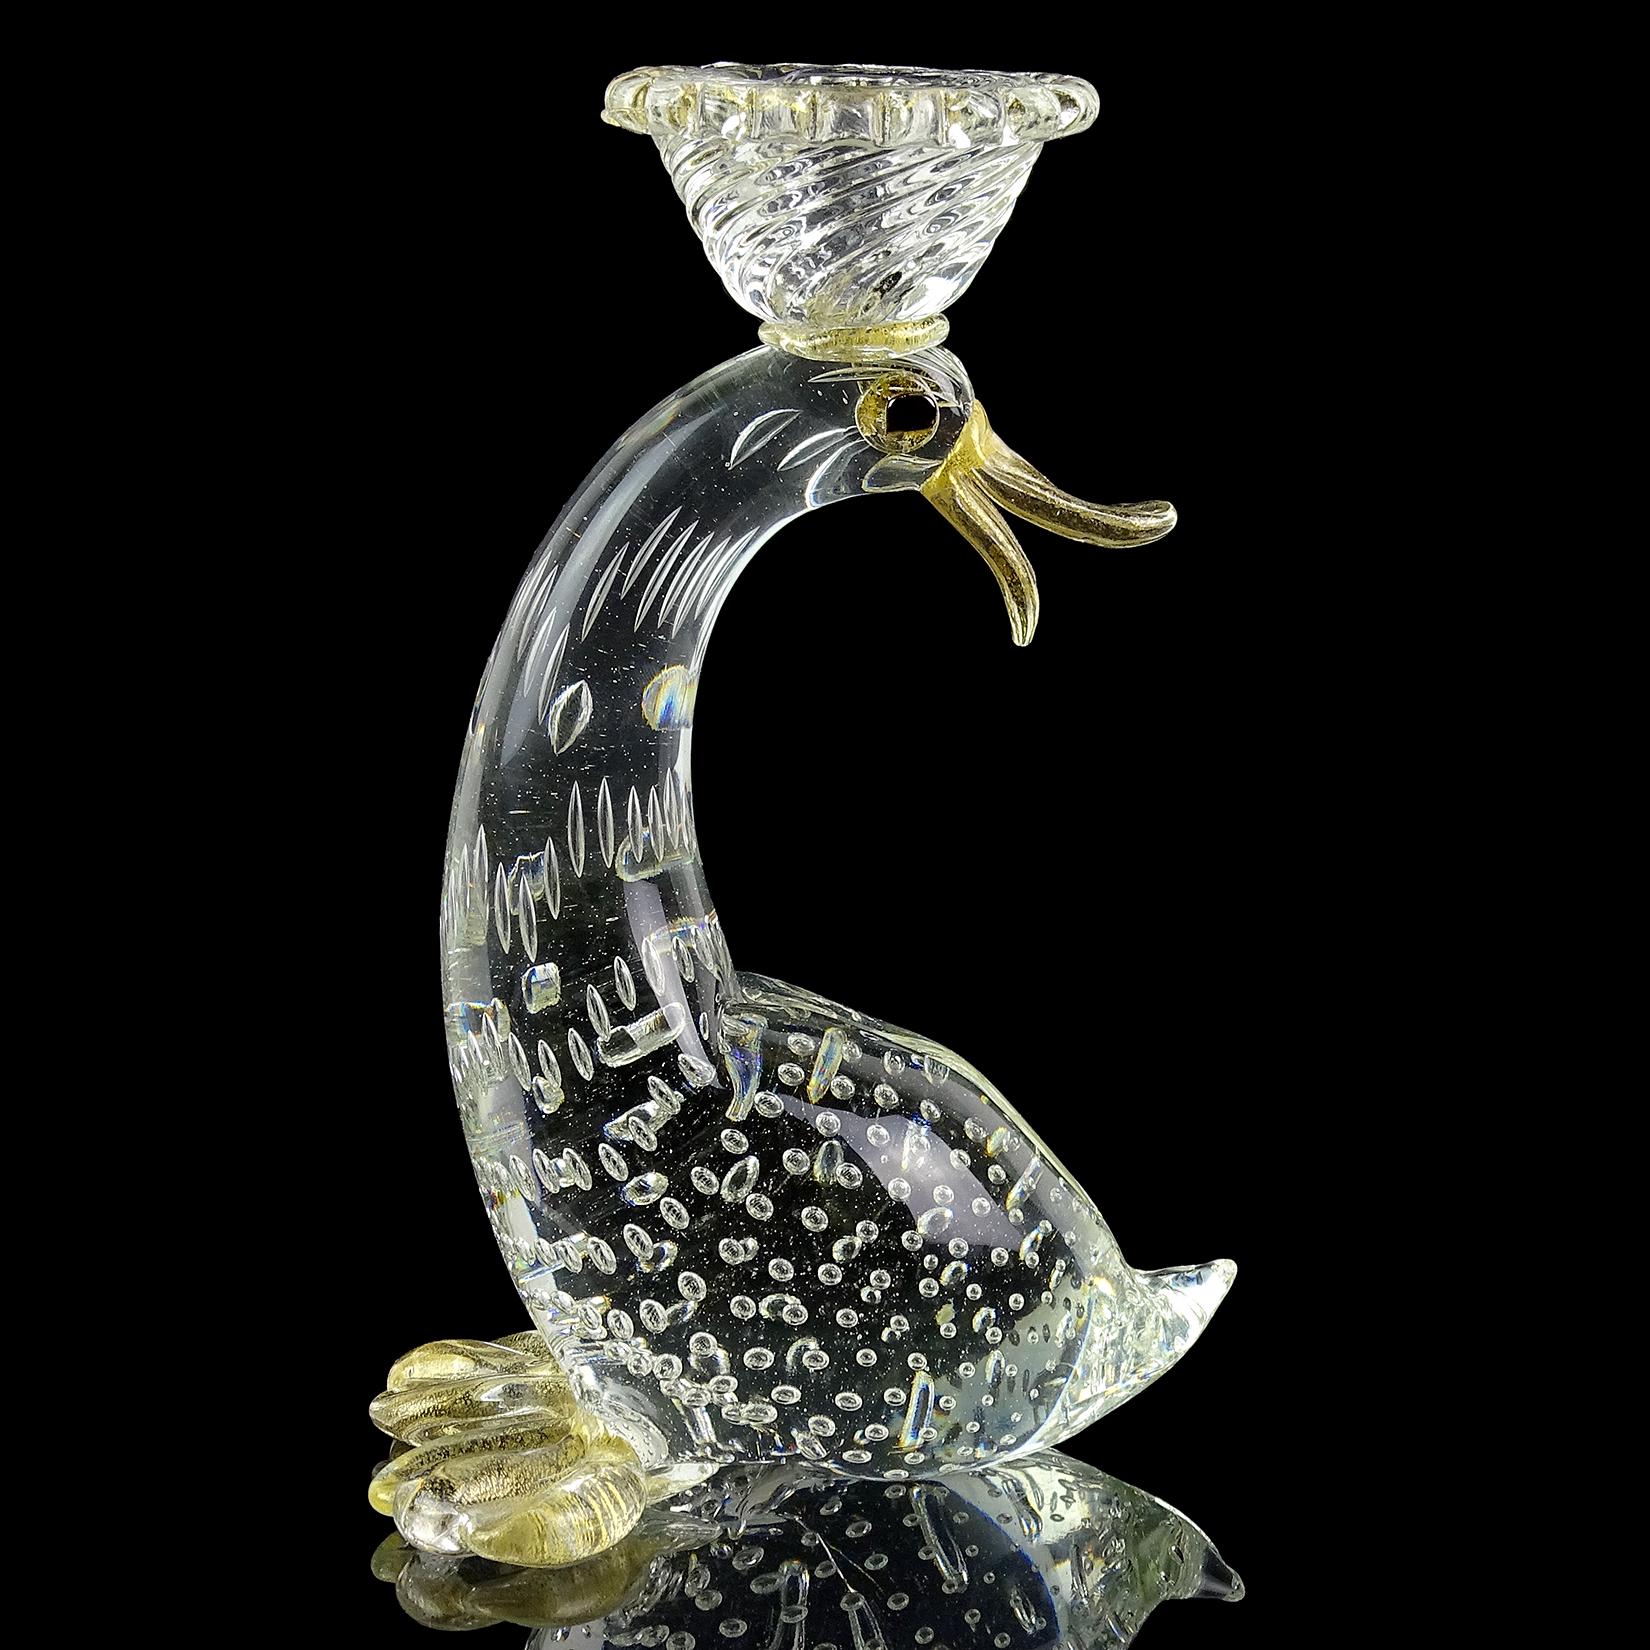 Beautiful large Murano crystal clear, bubbles and gold flecks Italian art glass duck sculpture / candlestick. Created by designer Ercole Barovier, for the Barovier e Toso company. The bird has gold leaf on its feet, beak, eyes, and rim of holder.